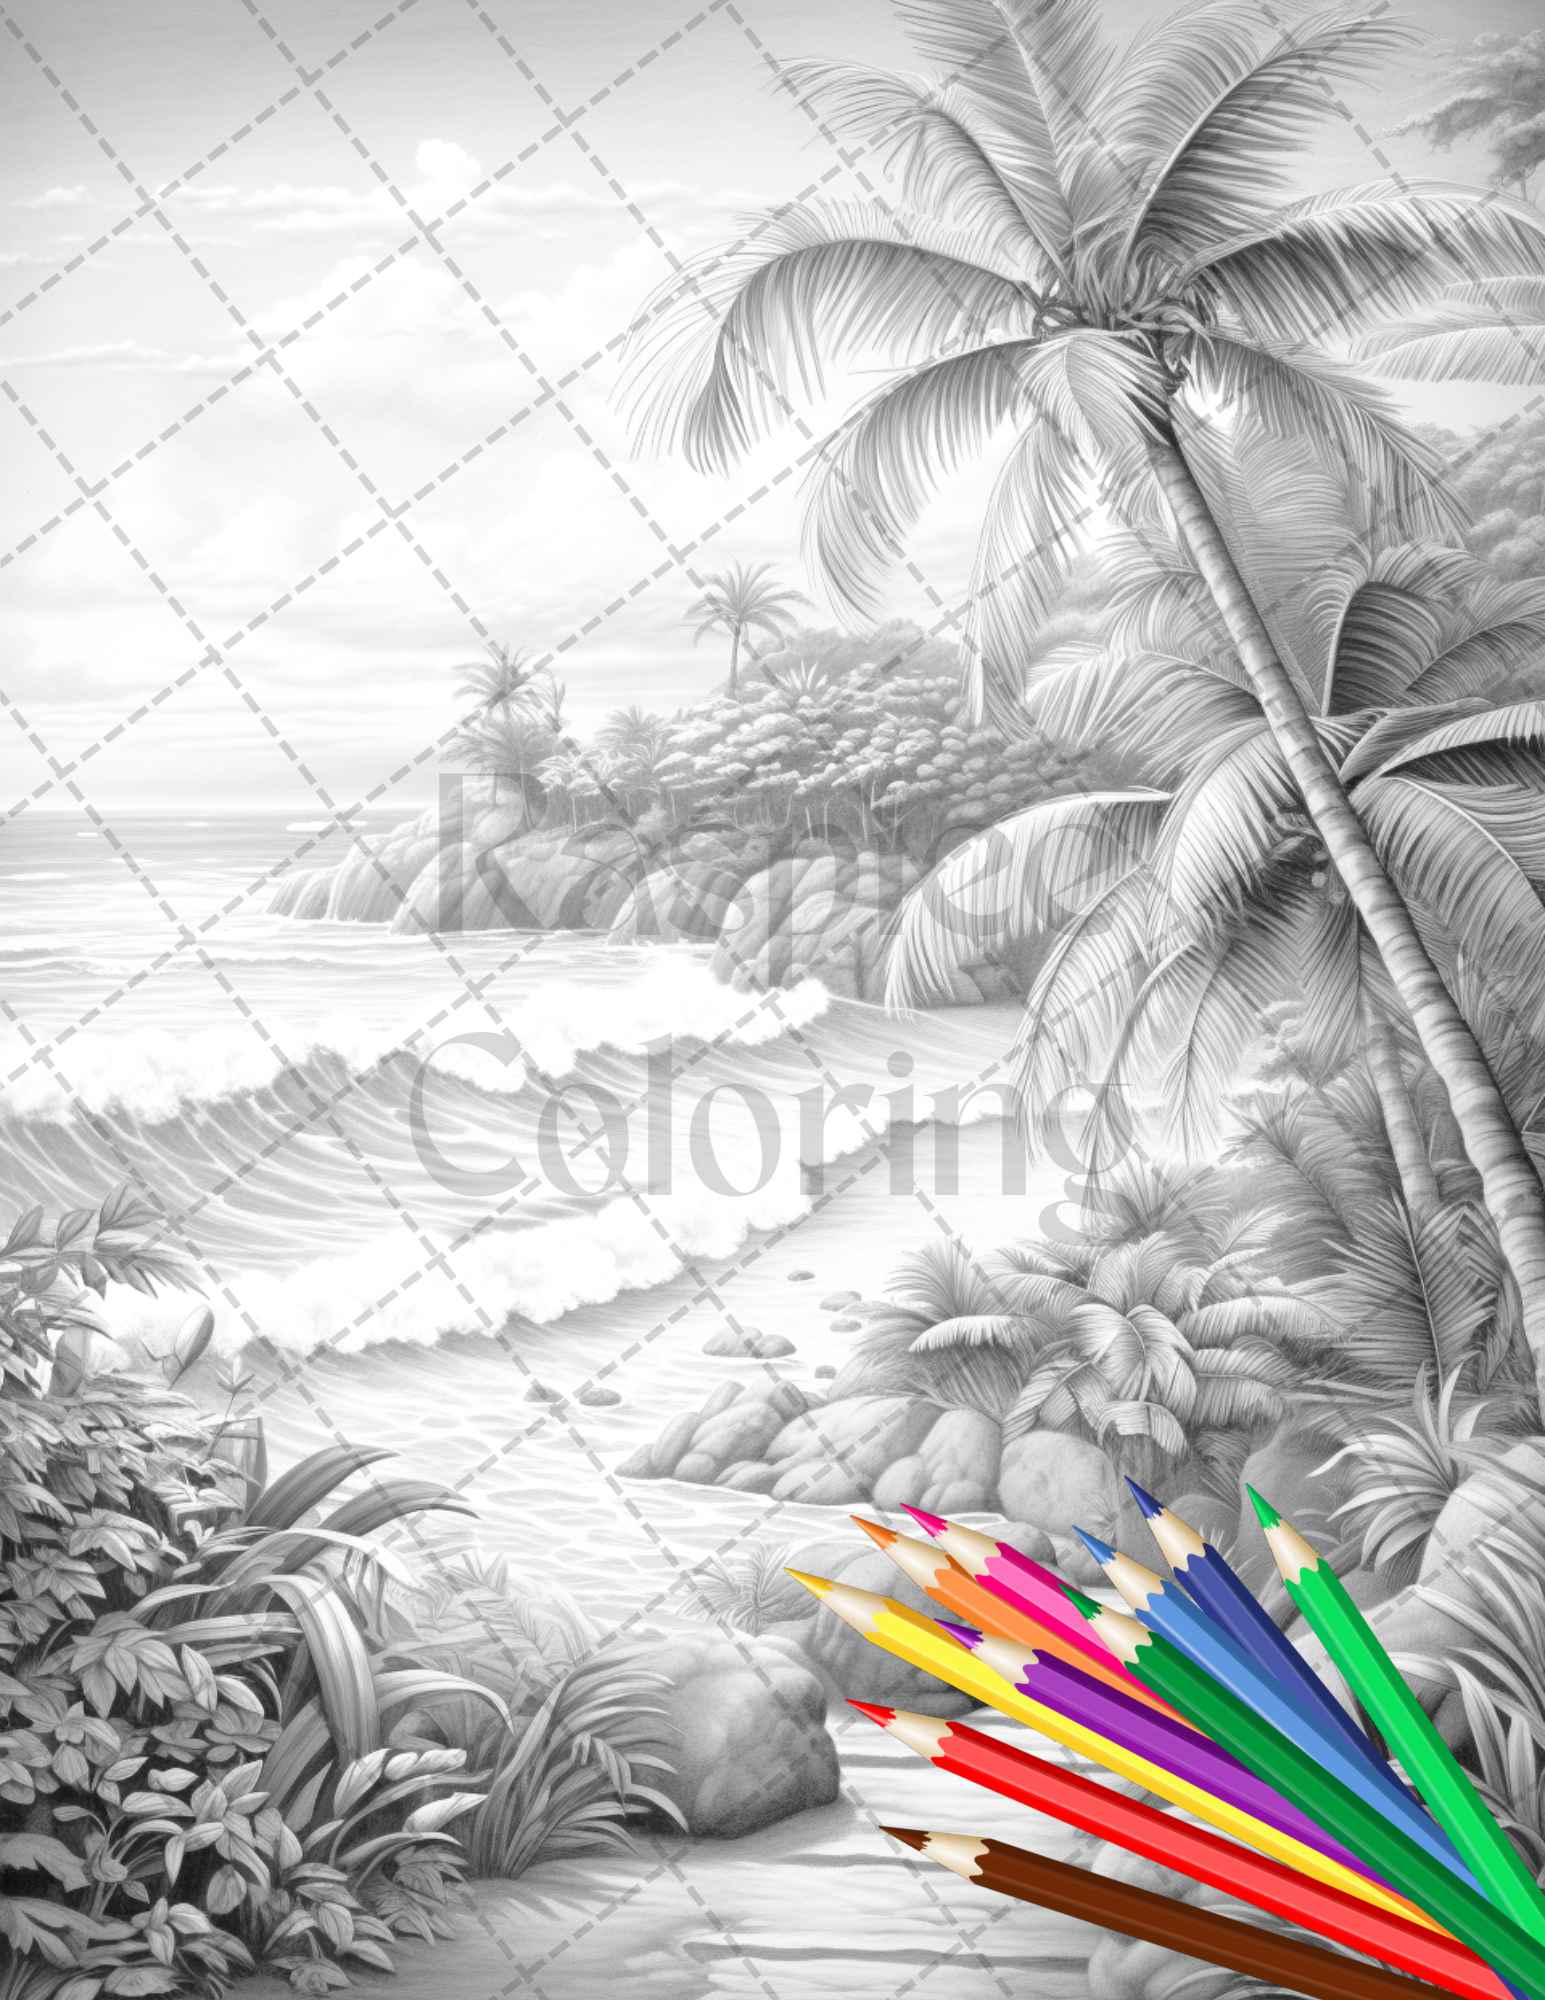 Beautiful Tropical Beach Grayscale Coloring Pages Printable for Adults, PDF File Instant Download - raspiee